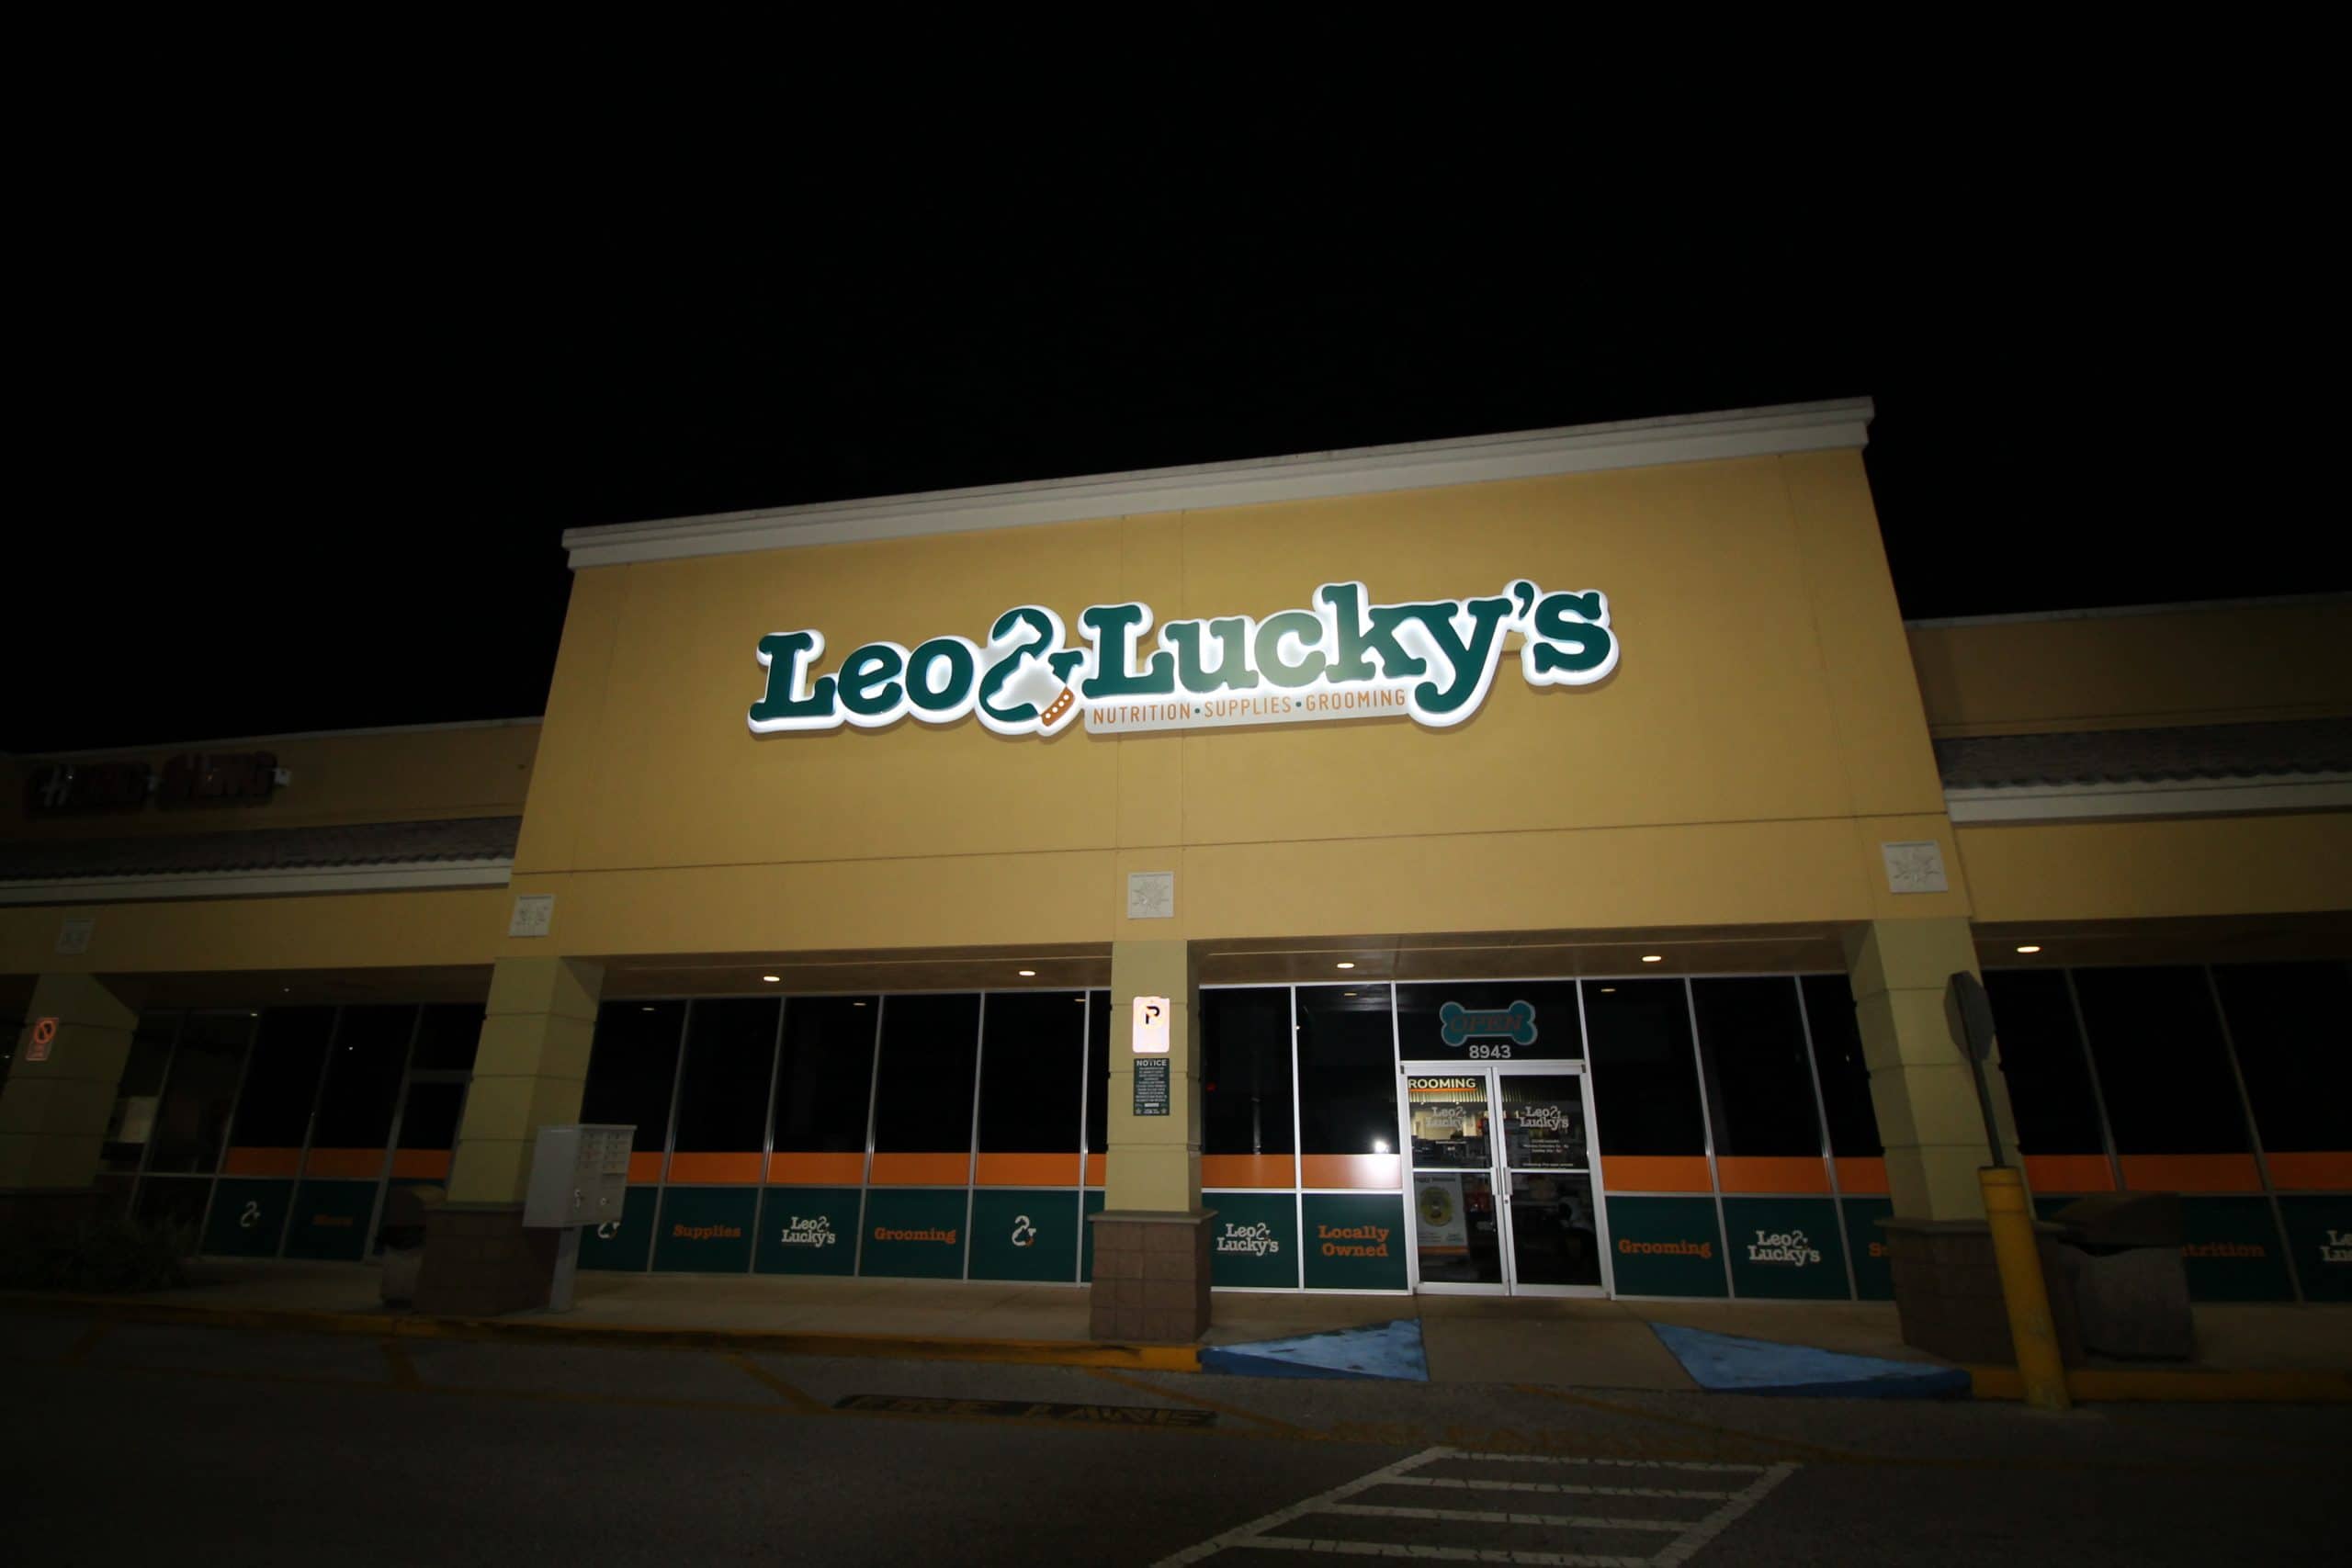 leo and luckys sign at night